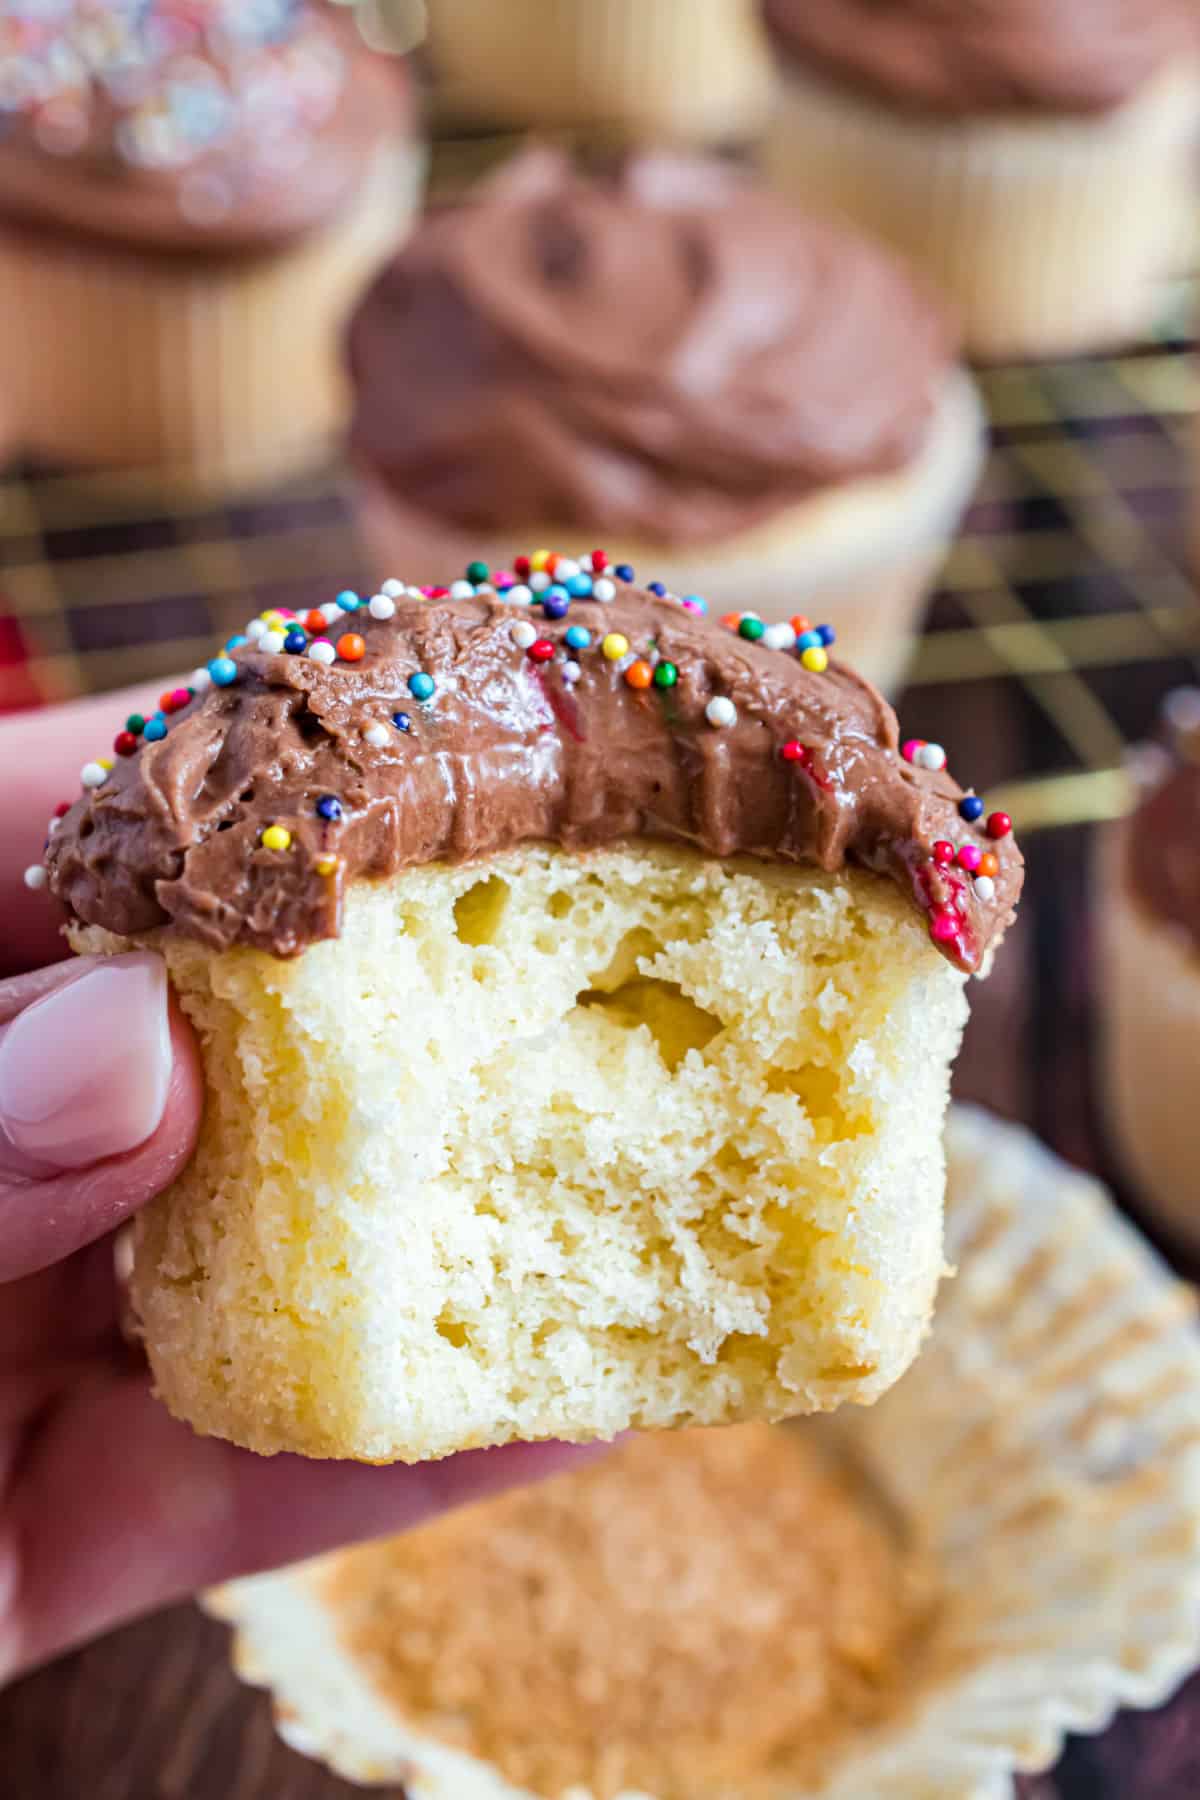 Chocolate frosting on yellow cupcake and one bite removed.